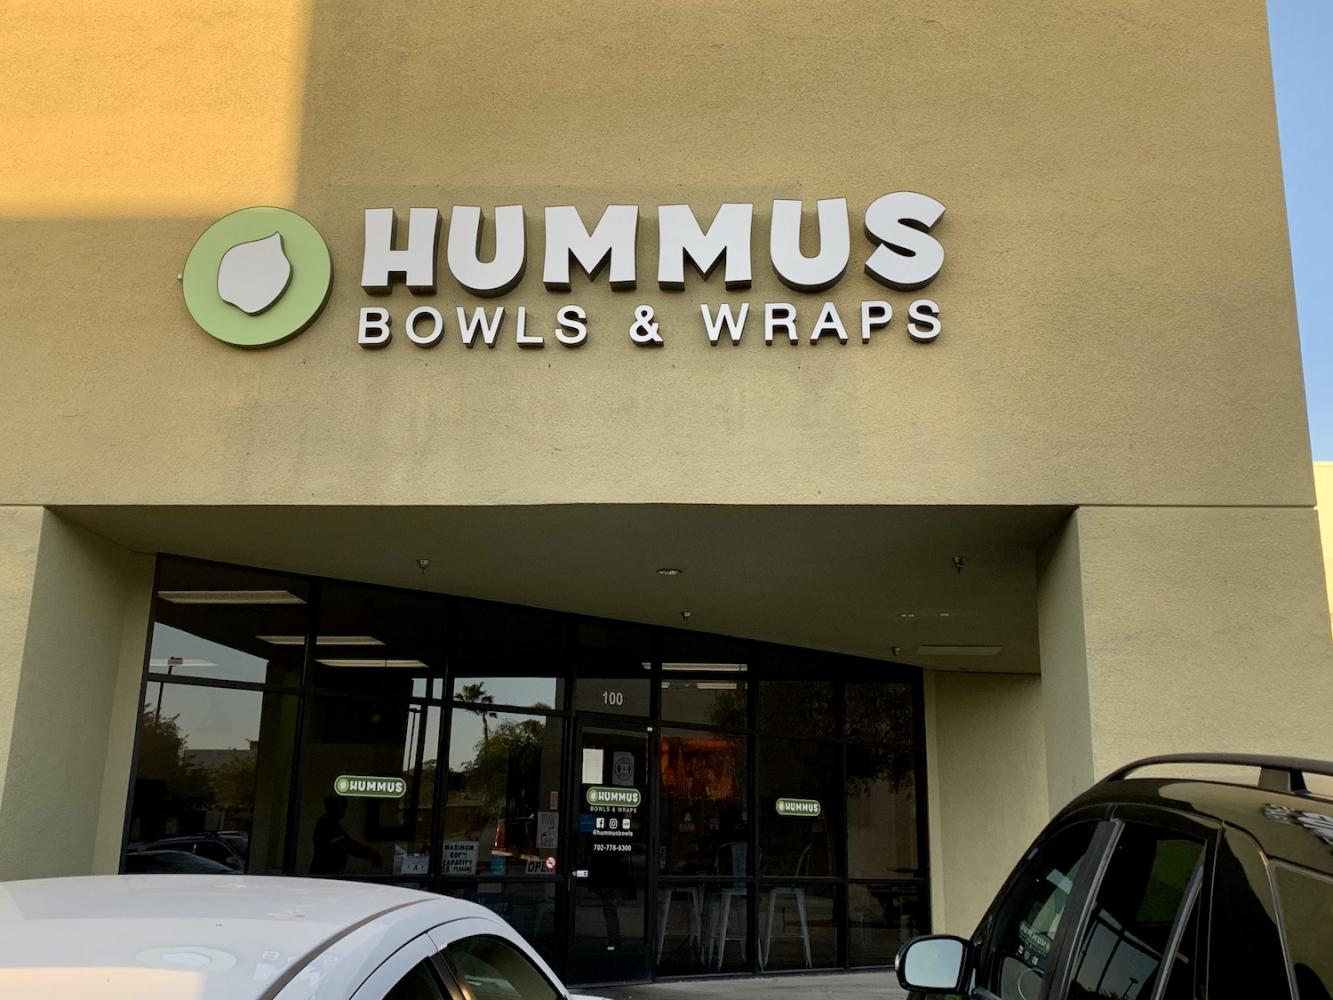 Personalizing the experience for every customer, HUMMUS offers bowls, wraps and fresh squeezed juices using ingredients prepared daily . Rating: A+ Photo Credit: Naila Yazdani 